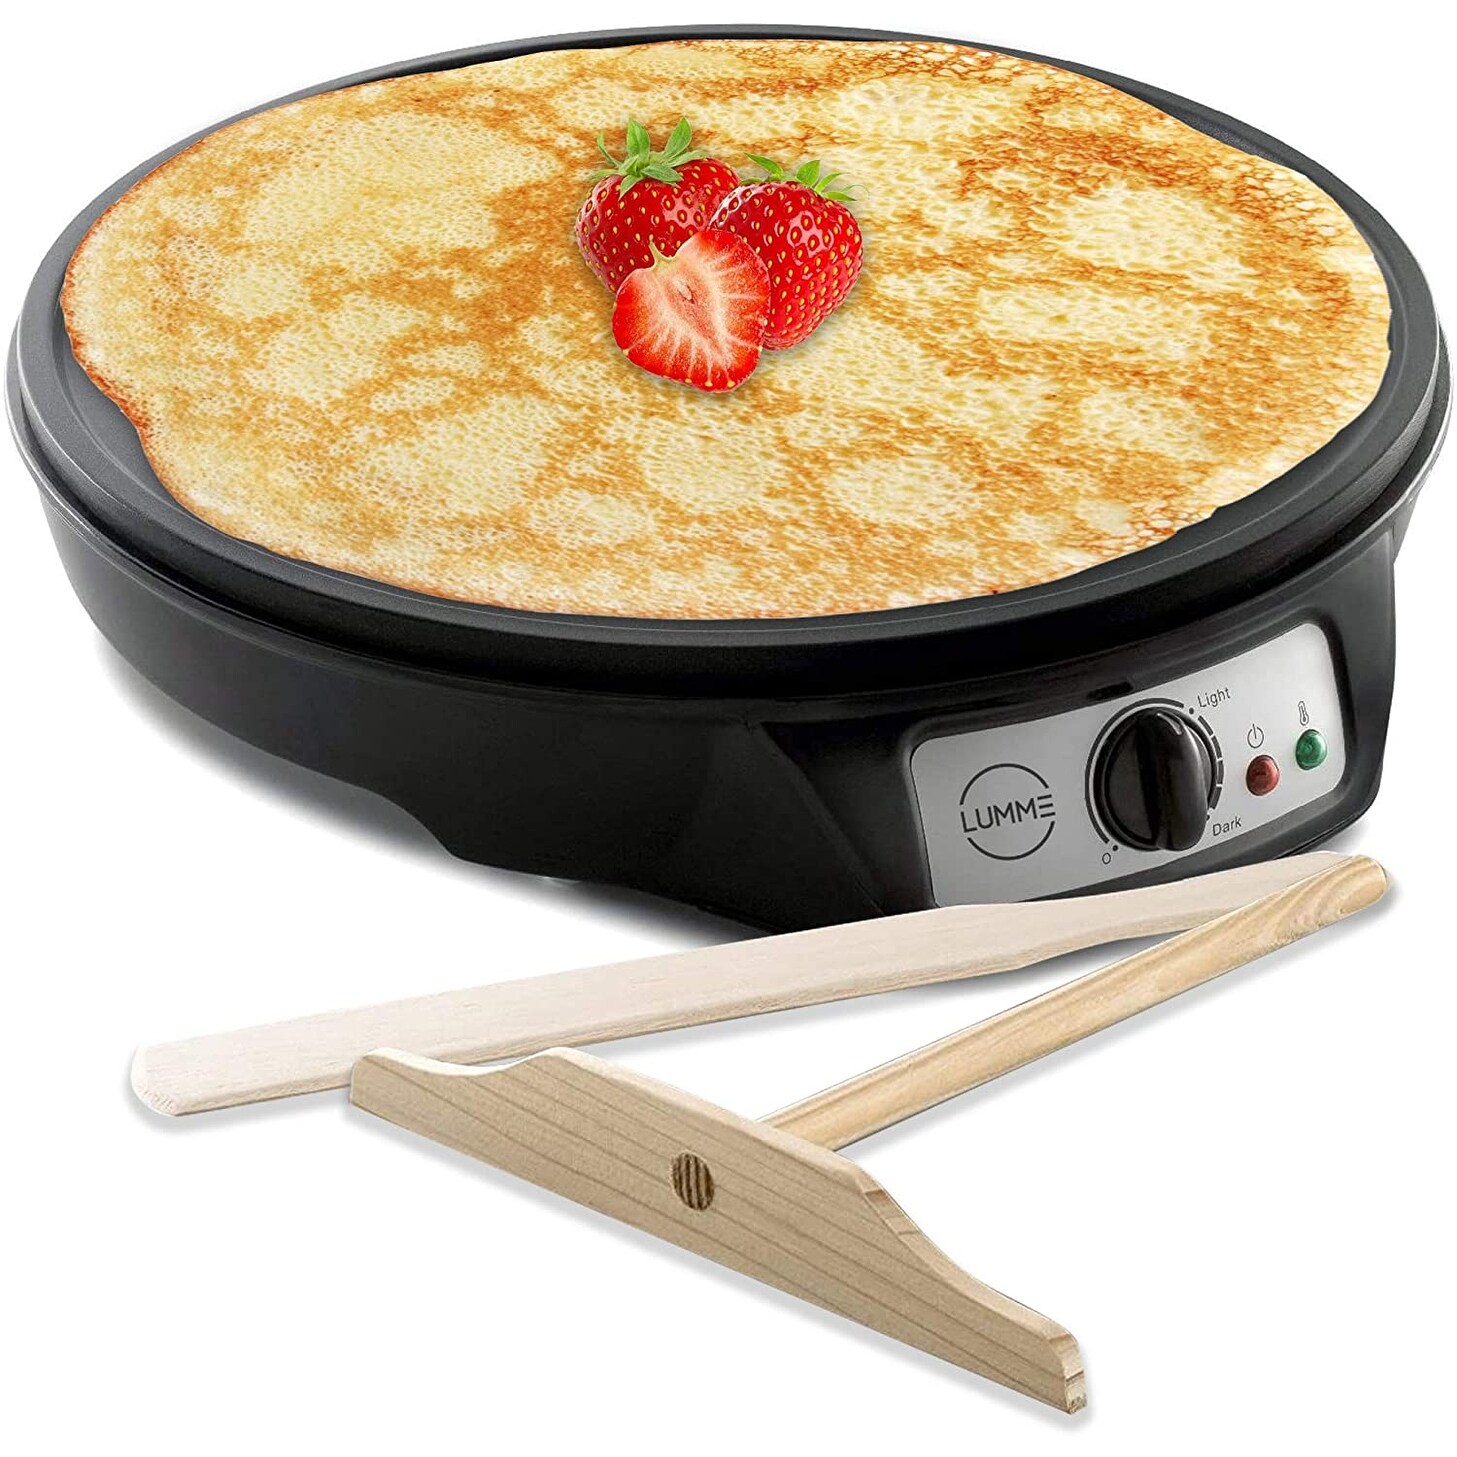 https://ak1.ostkcdn.com/images/products/is/images/direct/8244b979a0d98aae35be02ff459368c48b15f42c/Lumme-Crepe-Maker---Nonstick-12-inch-Breakfast-Griddle-Hot-Plate.jpg